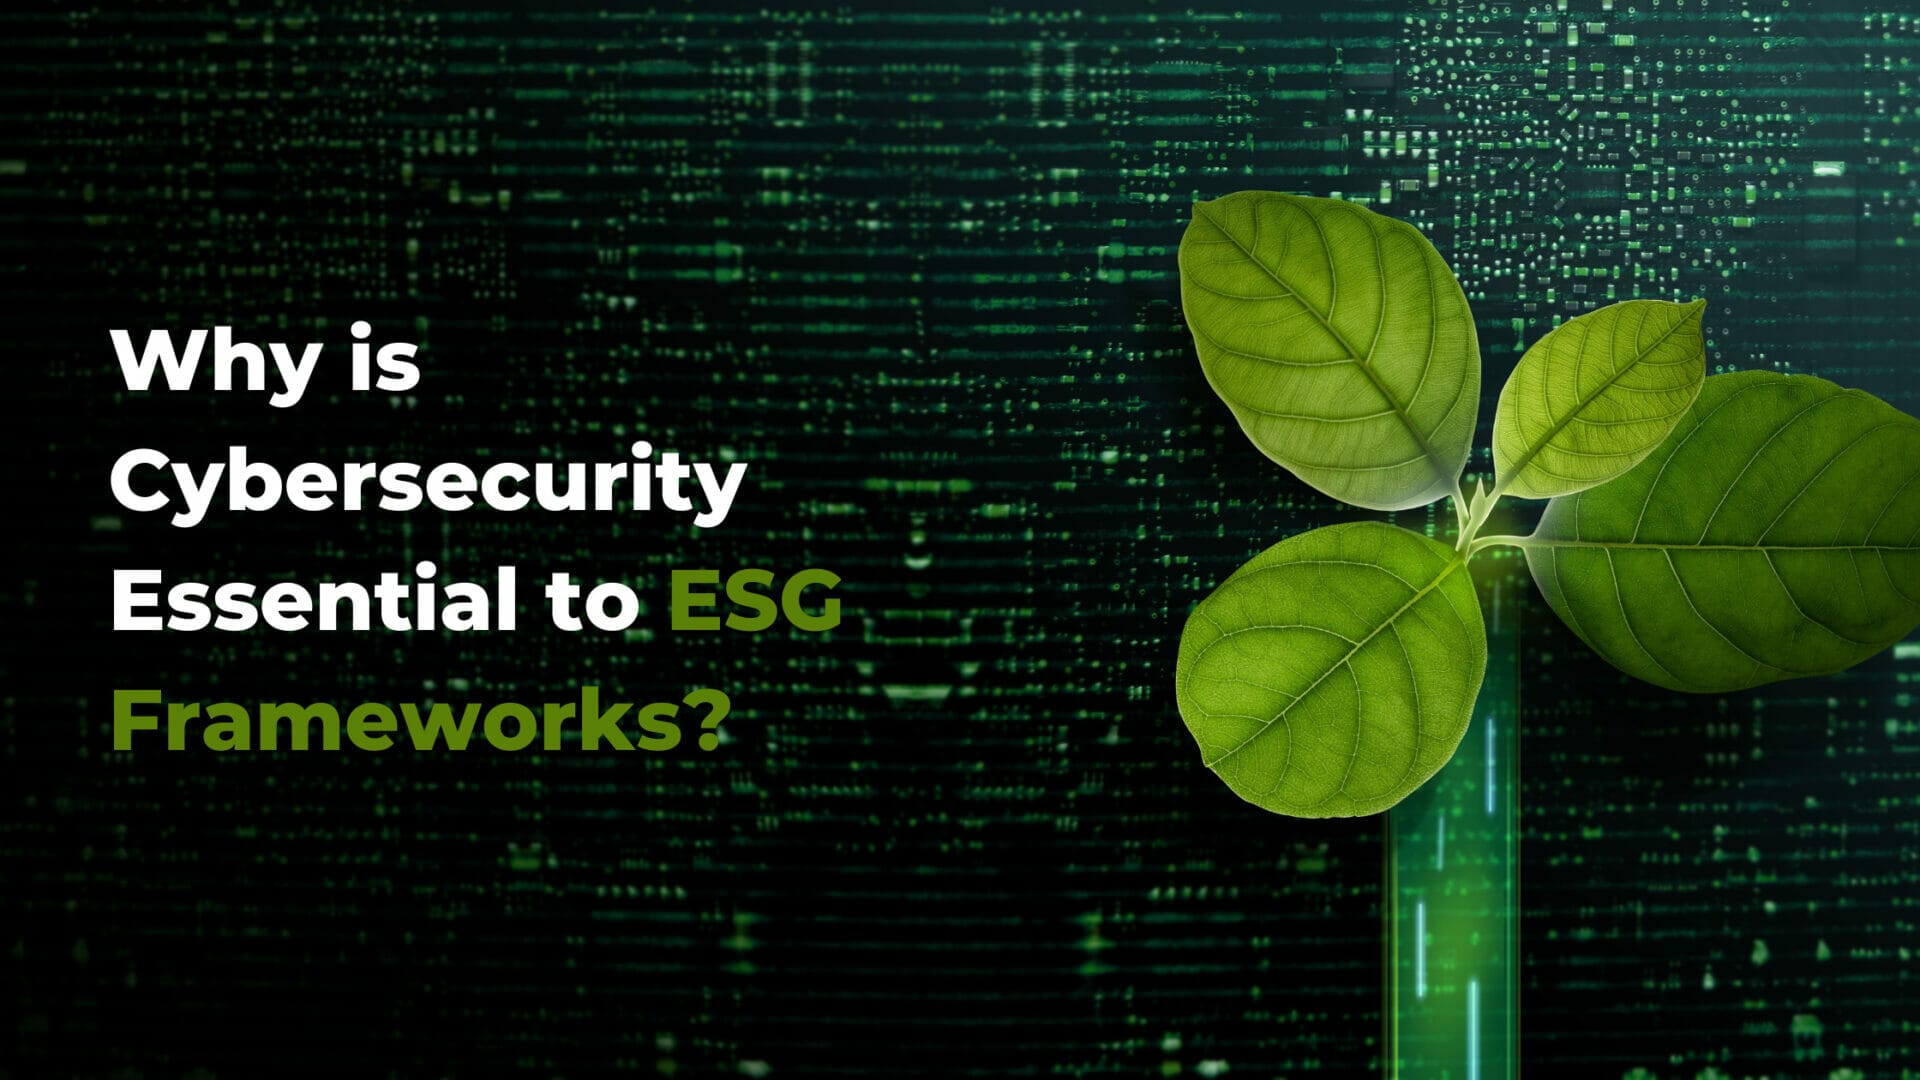 Blog Banner of "Why is Cybersecurity Essential to ESG Frameworks"